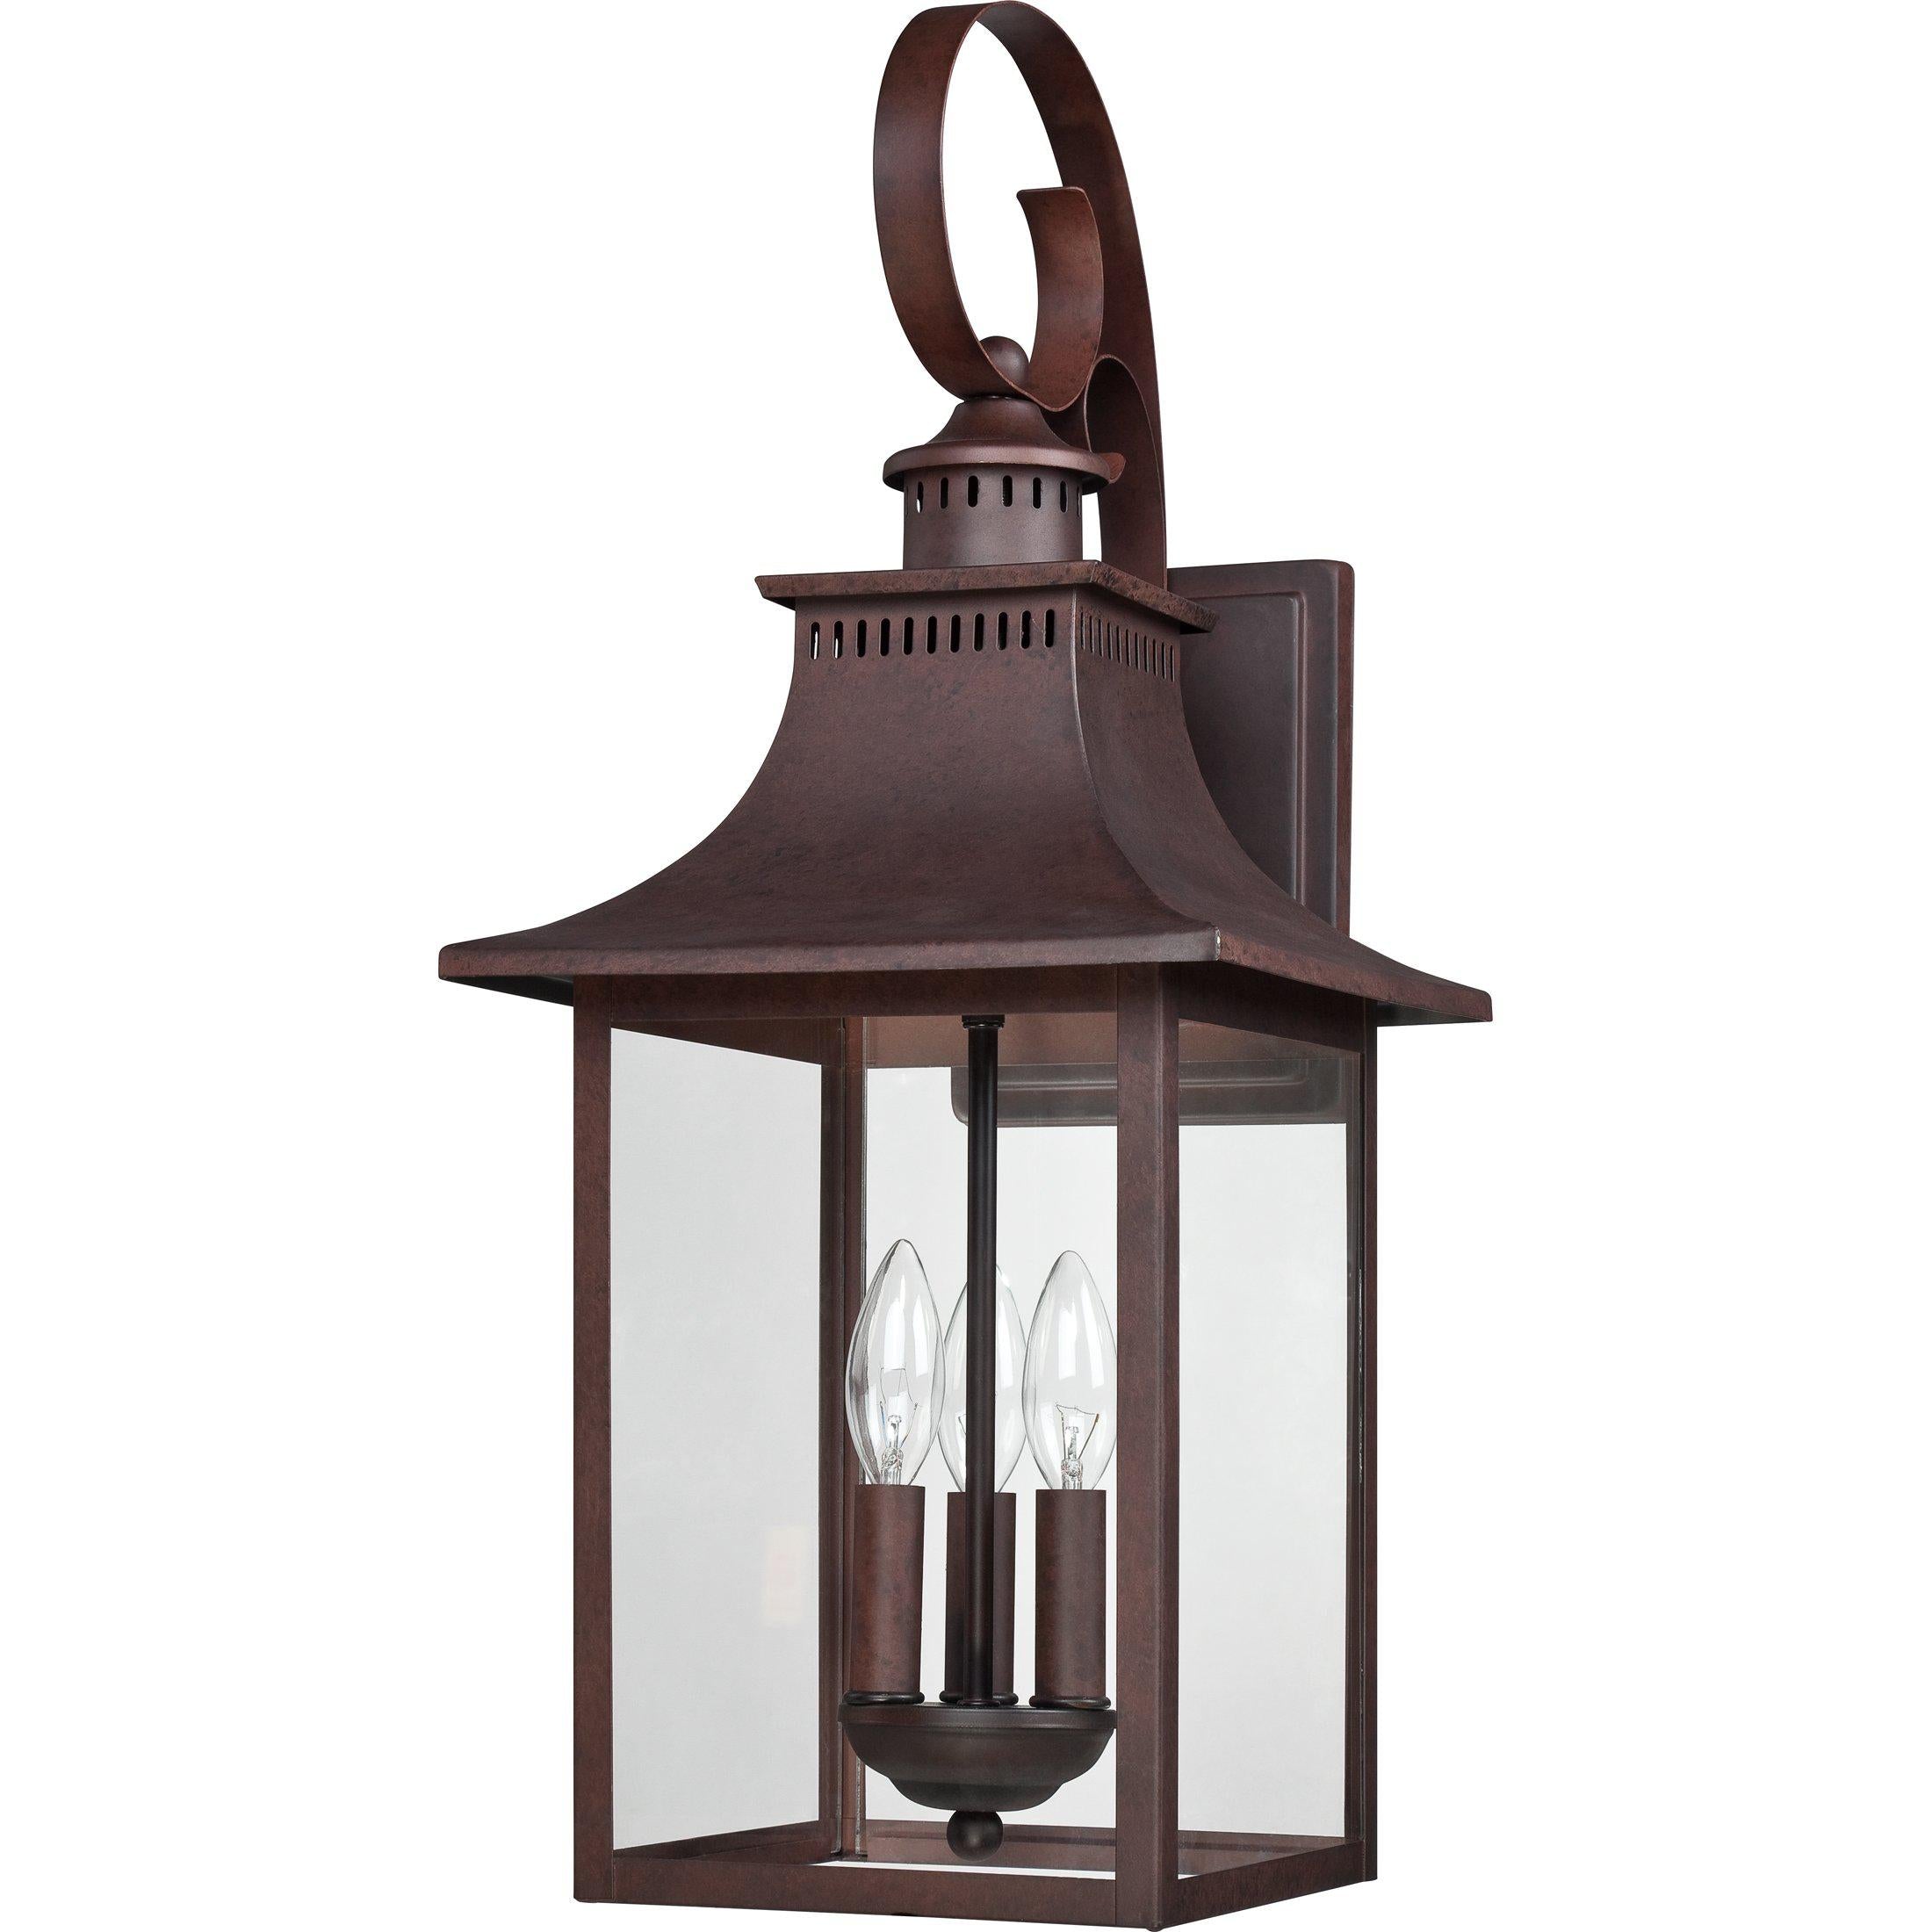 Quoizel  Chancellor Outdoor Lantern, Large Outdoor l Wall Quoizel   